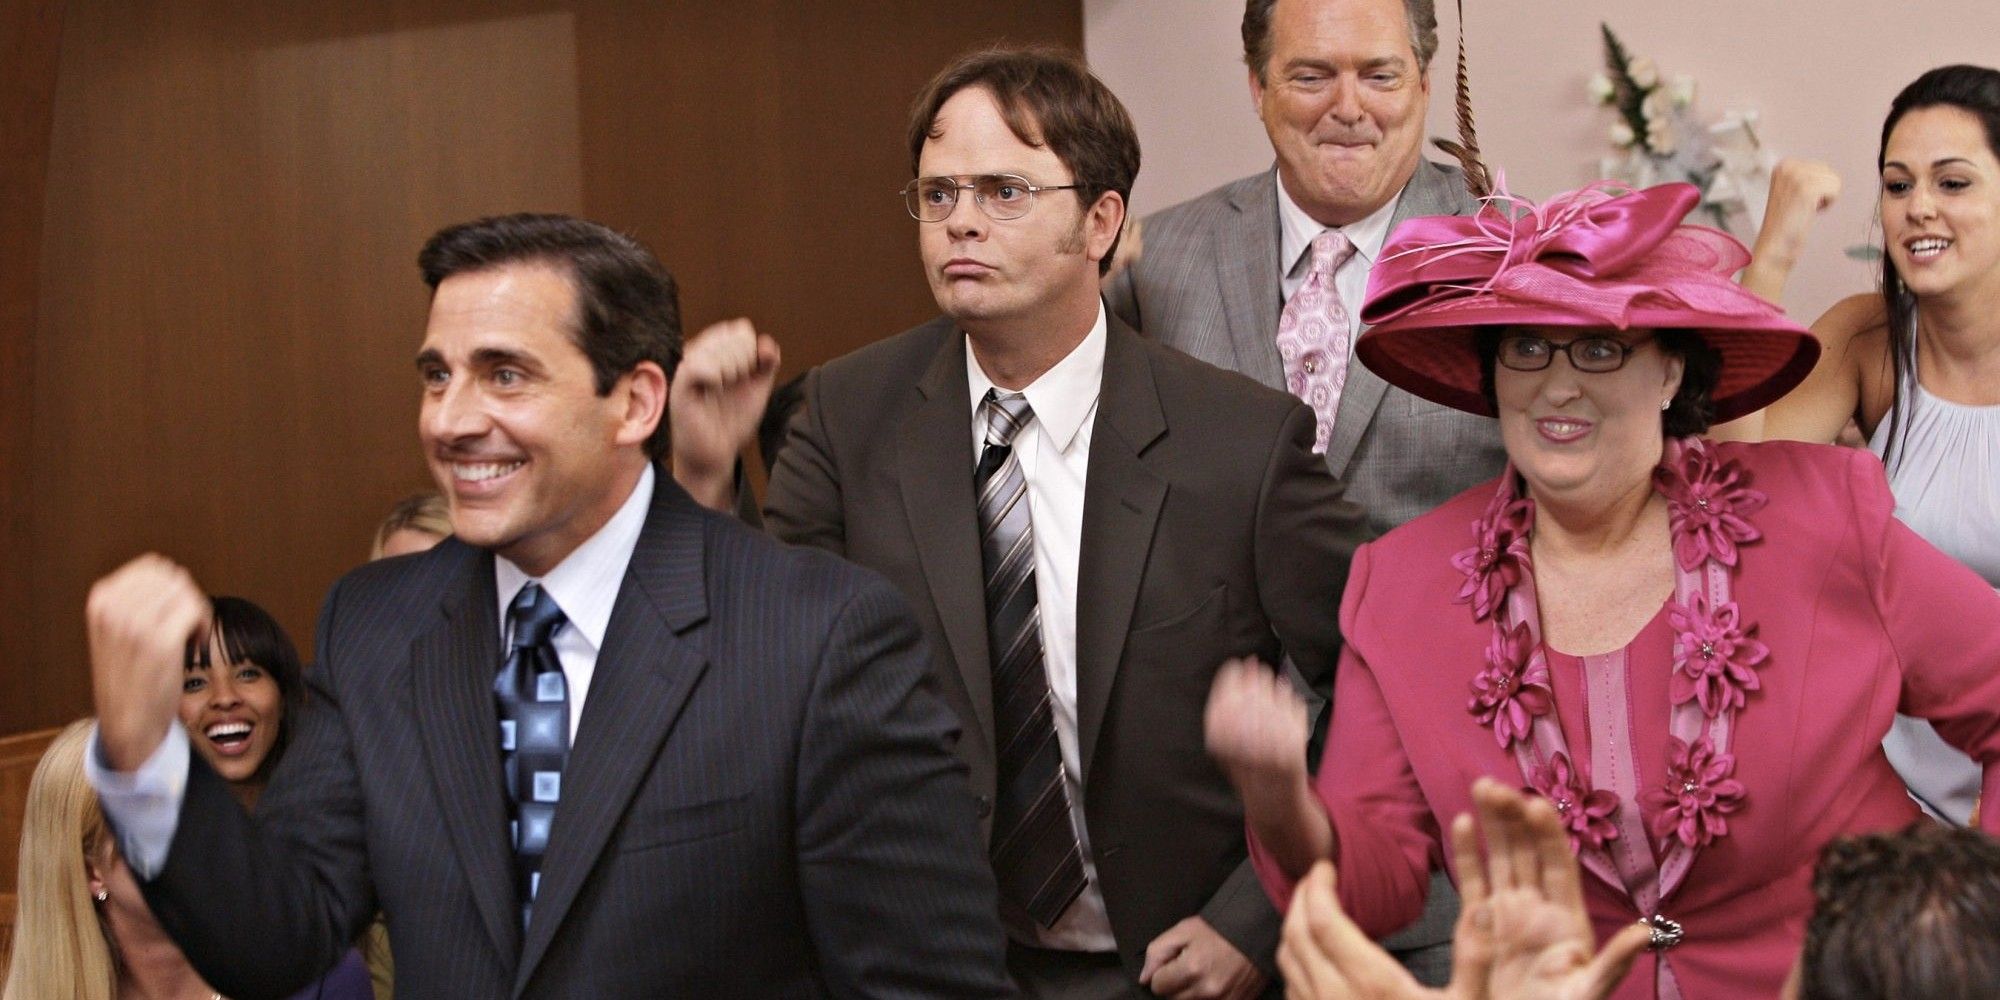 Michael and the other eployees dancing at Jim and Pam's wedding in The Office.